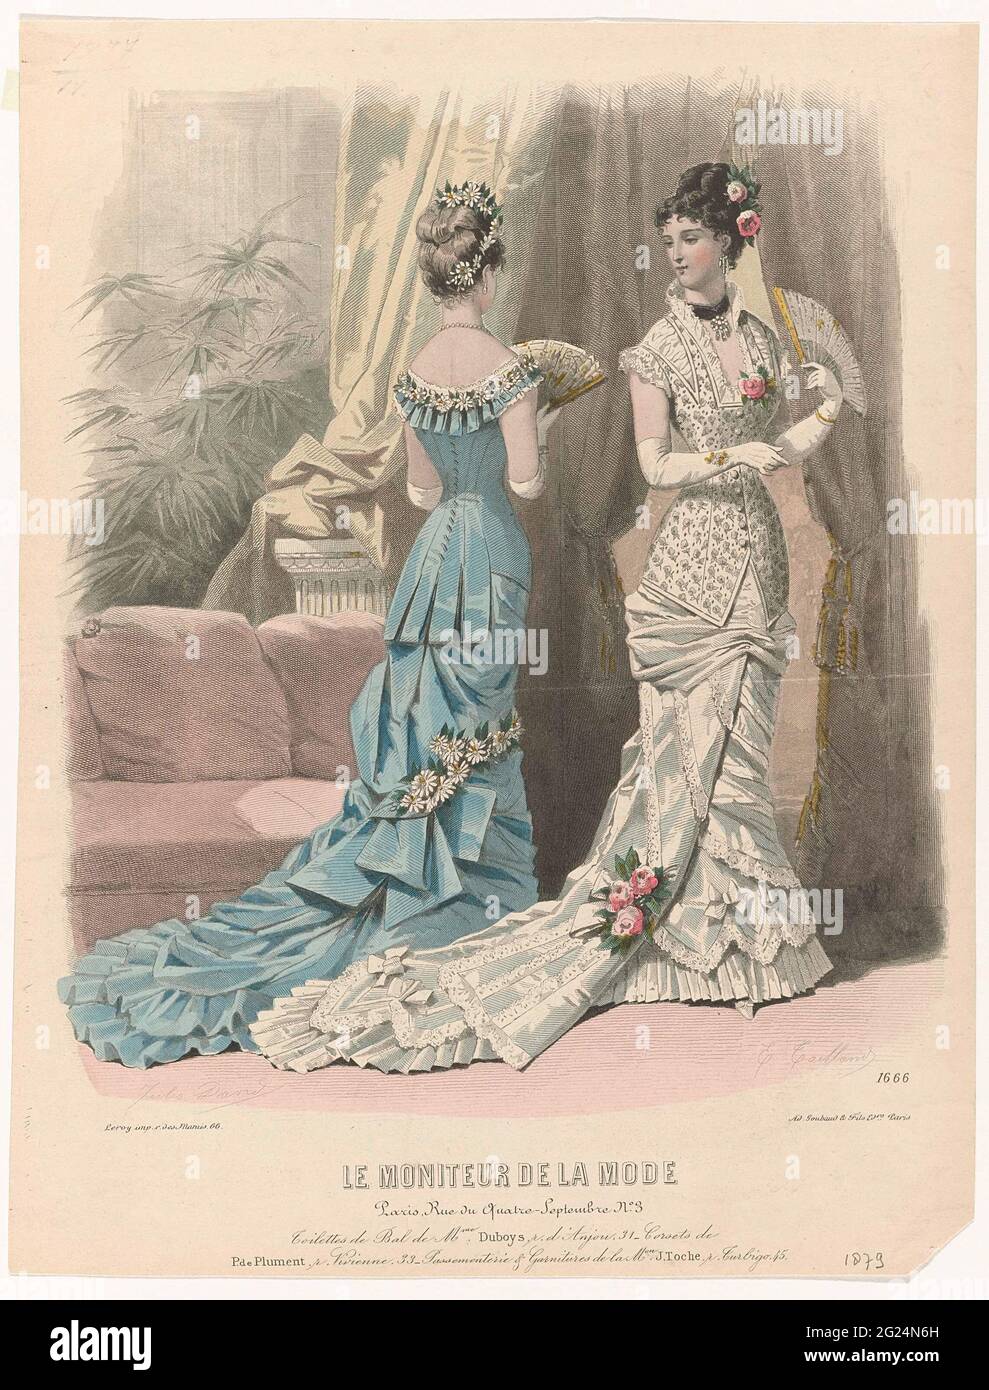 Le Moniteur de la Mode, 1879, no. 1666: Toilettes the ball (). Two  women, one of whom seen on the back, dressed in ballies, garnished with  flowers and pleated fabric. According to